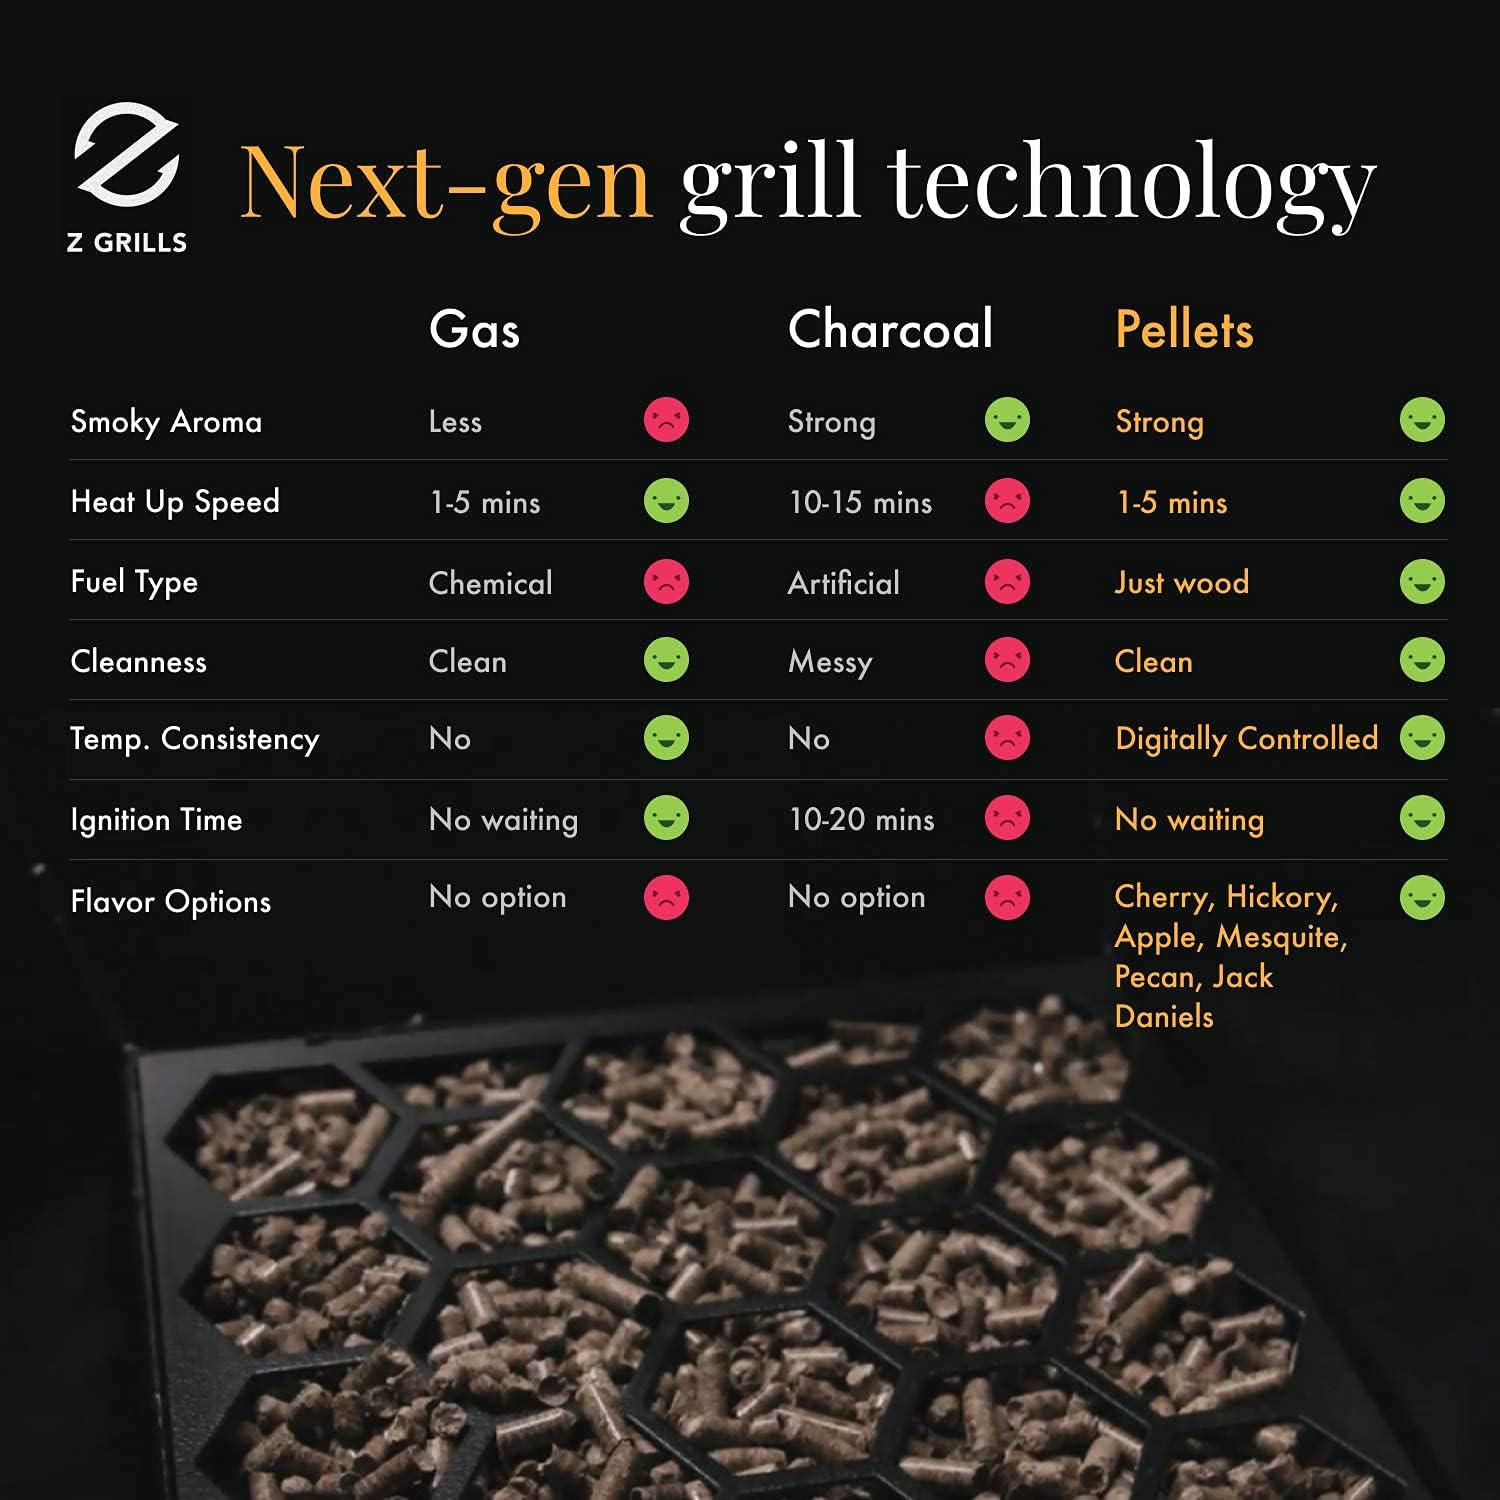 Z GRILLS ZPG-450A 2023 Upgrade Wood Pellet Grill  Smoker 6 in 1 BBQ Grill Auto Temperature Control, 450 Sq in Bronze